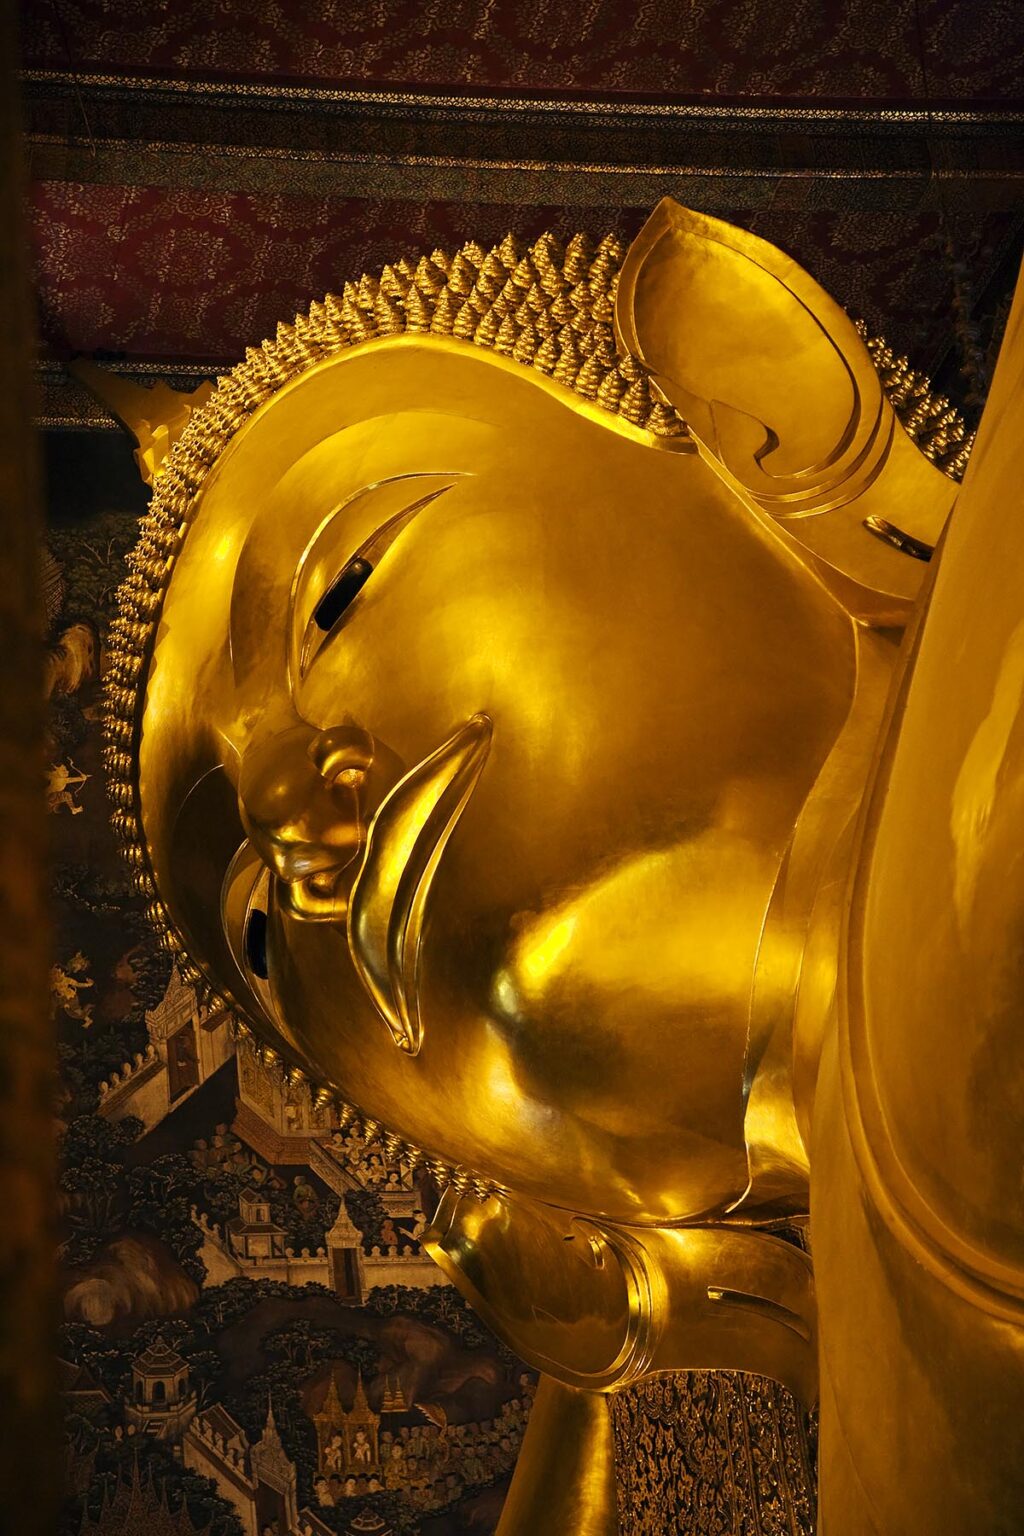 The gilded FACE of the largest RECLINING BUDDHA in THAILAND (46 meters long) which is found at the THERAVADA BUDDHIST TEMPLE of WAT PO - BANGKOK, THAILAND